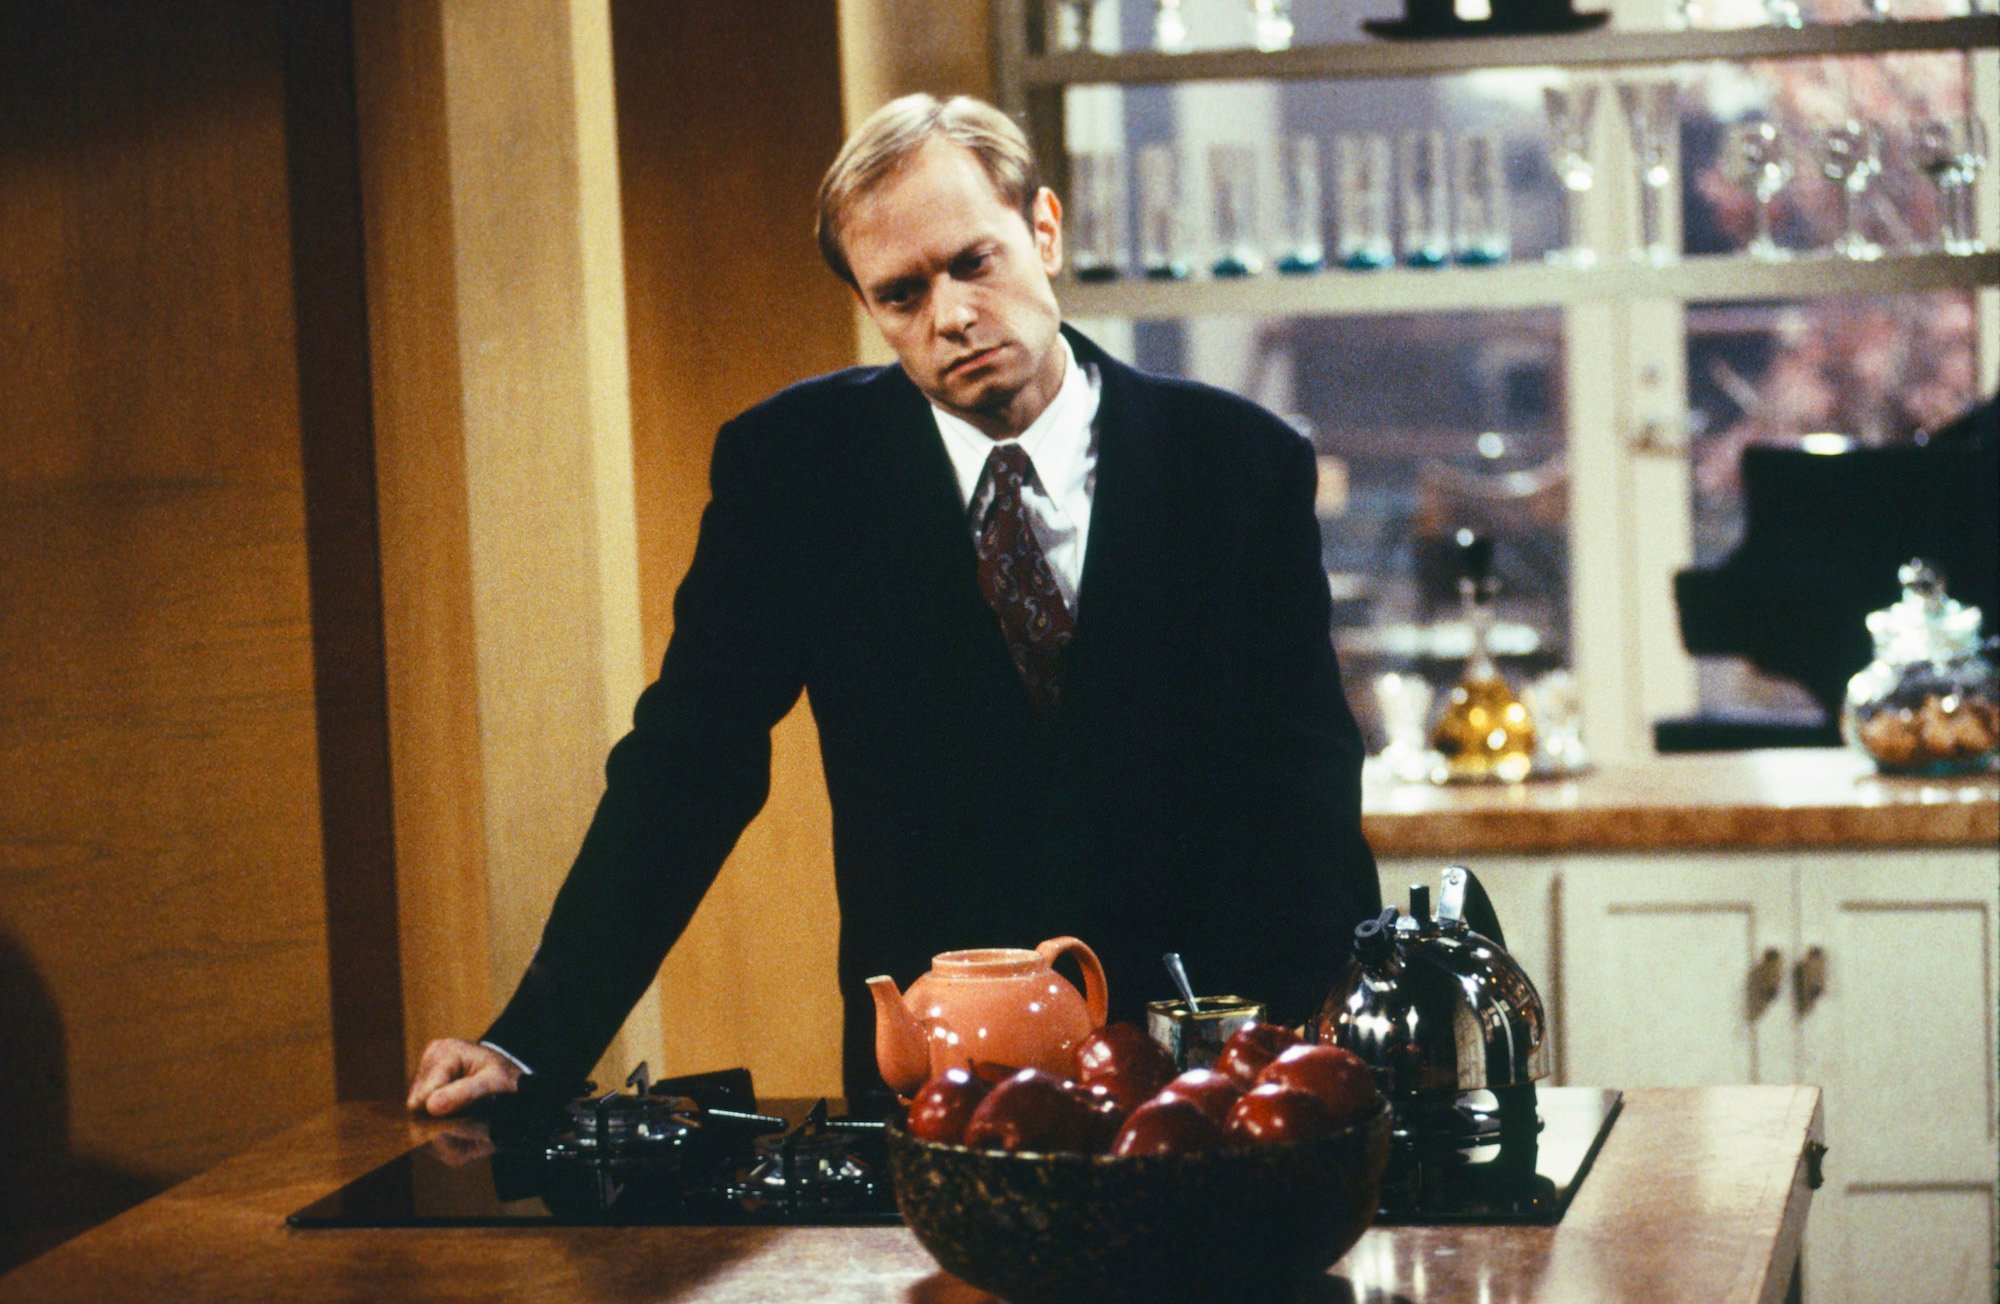 David Hyde Pierce as Dr. Niles Crane leaning over a counter